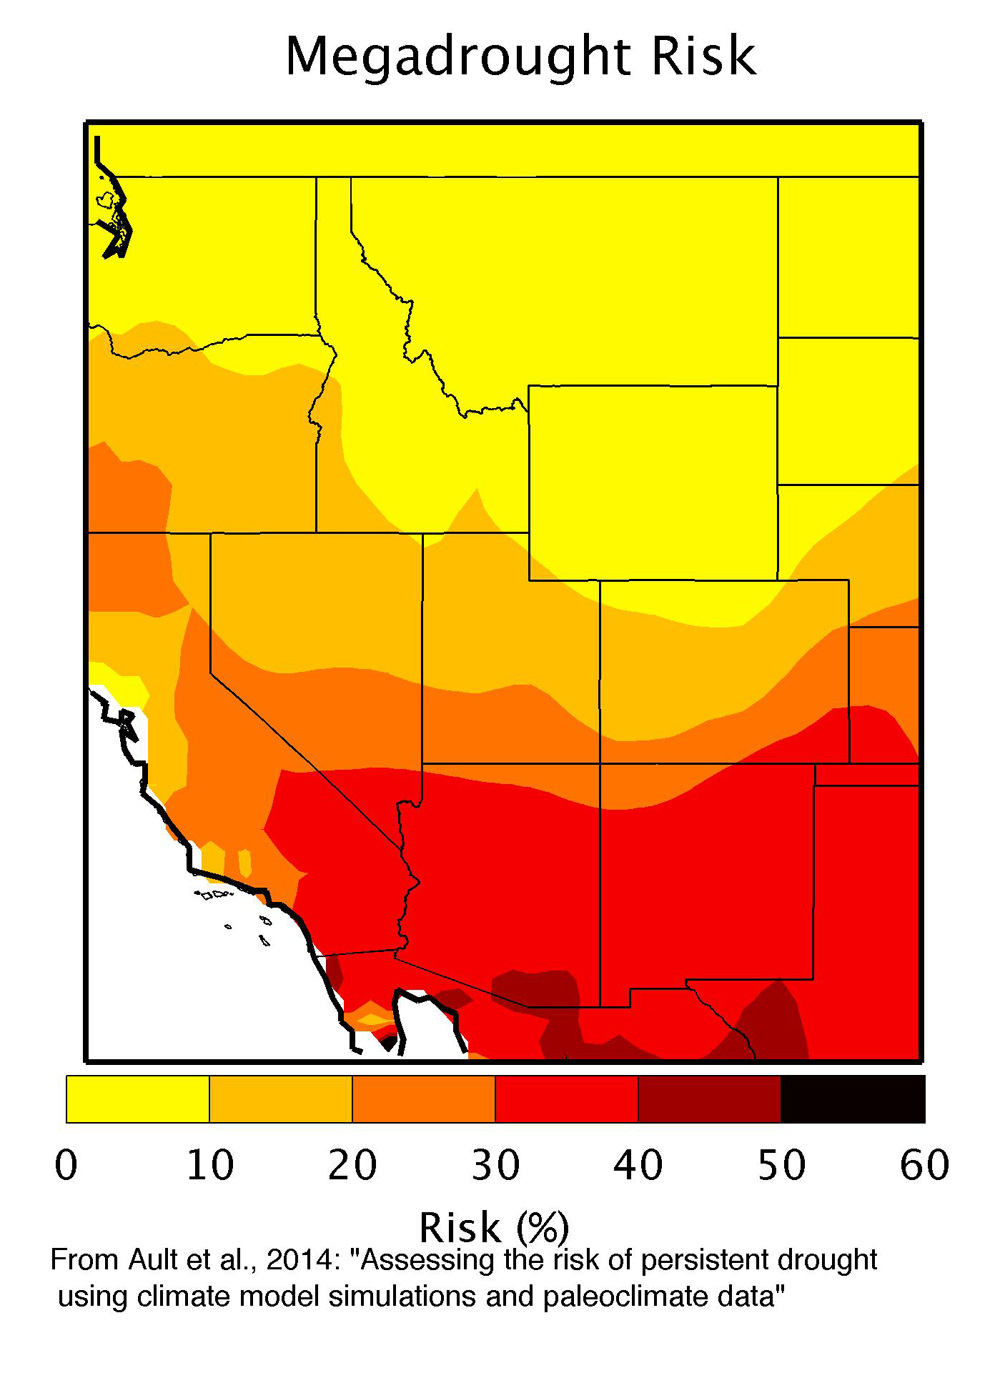 The risk of megadrought over the next century in the Southwest (Credit: Cornell University)